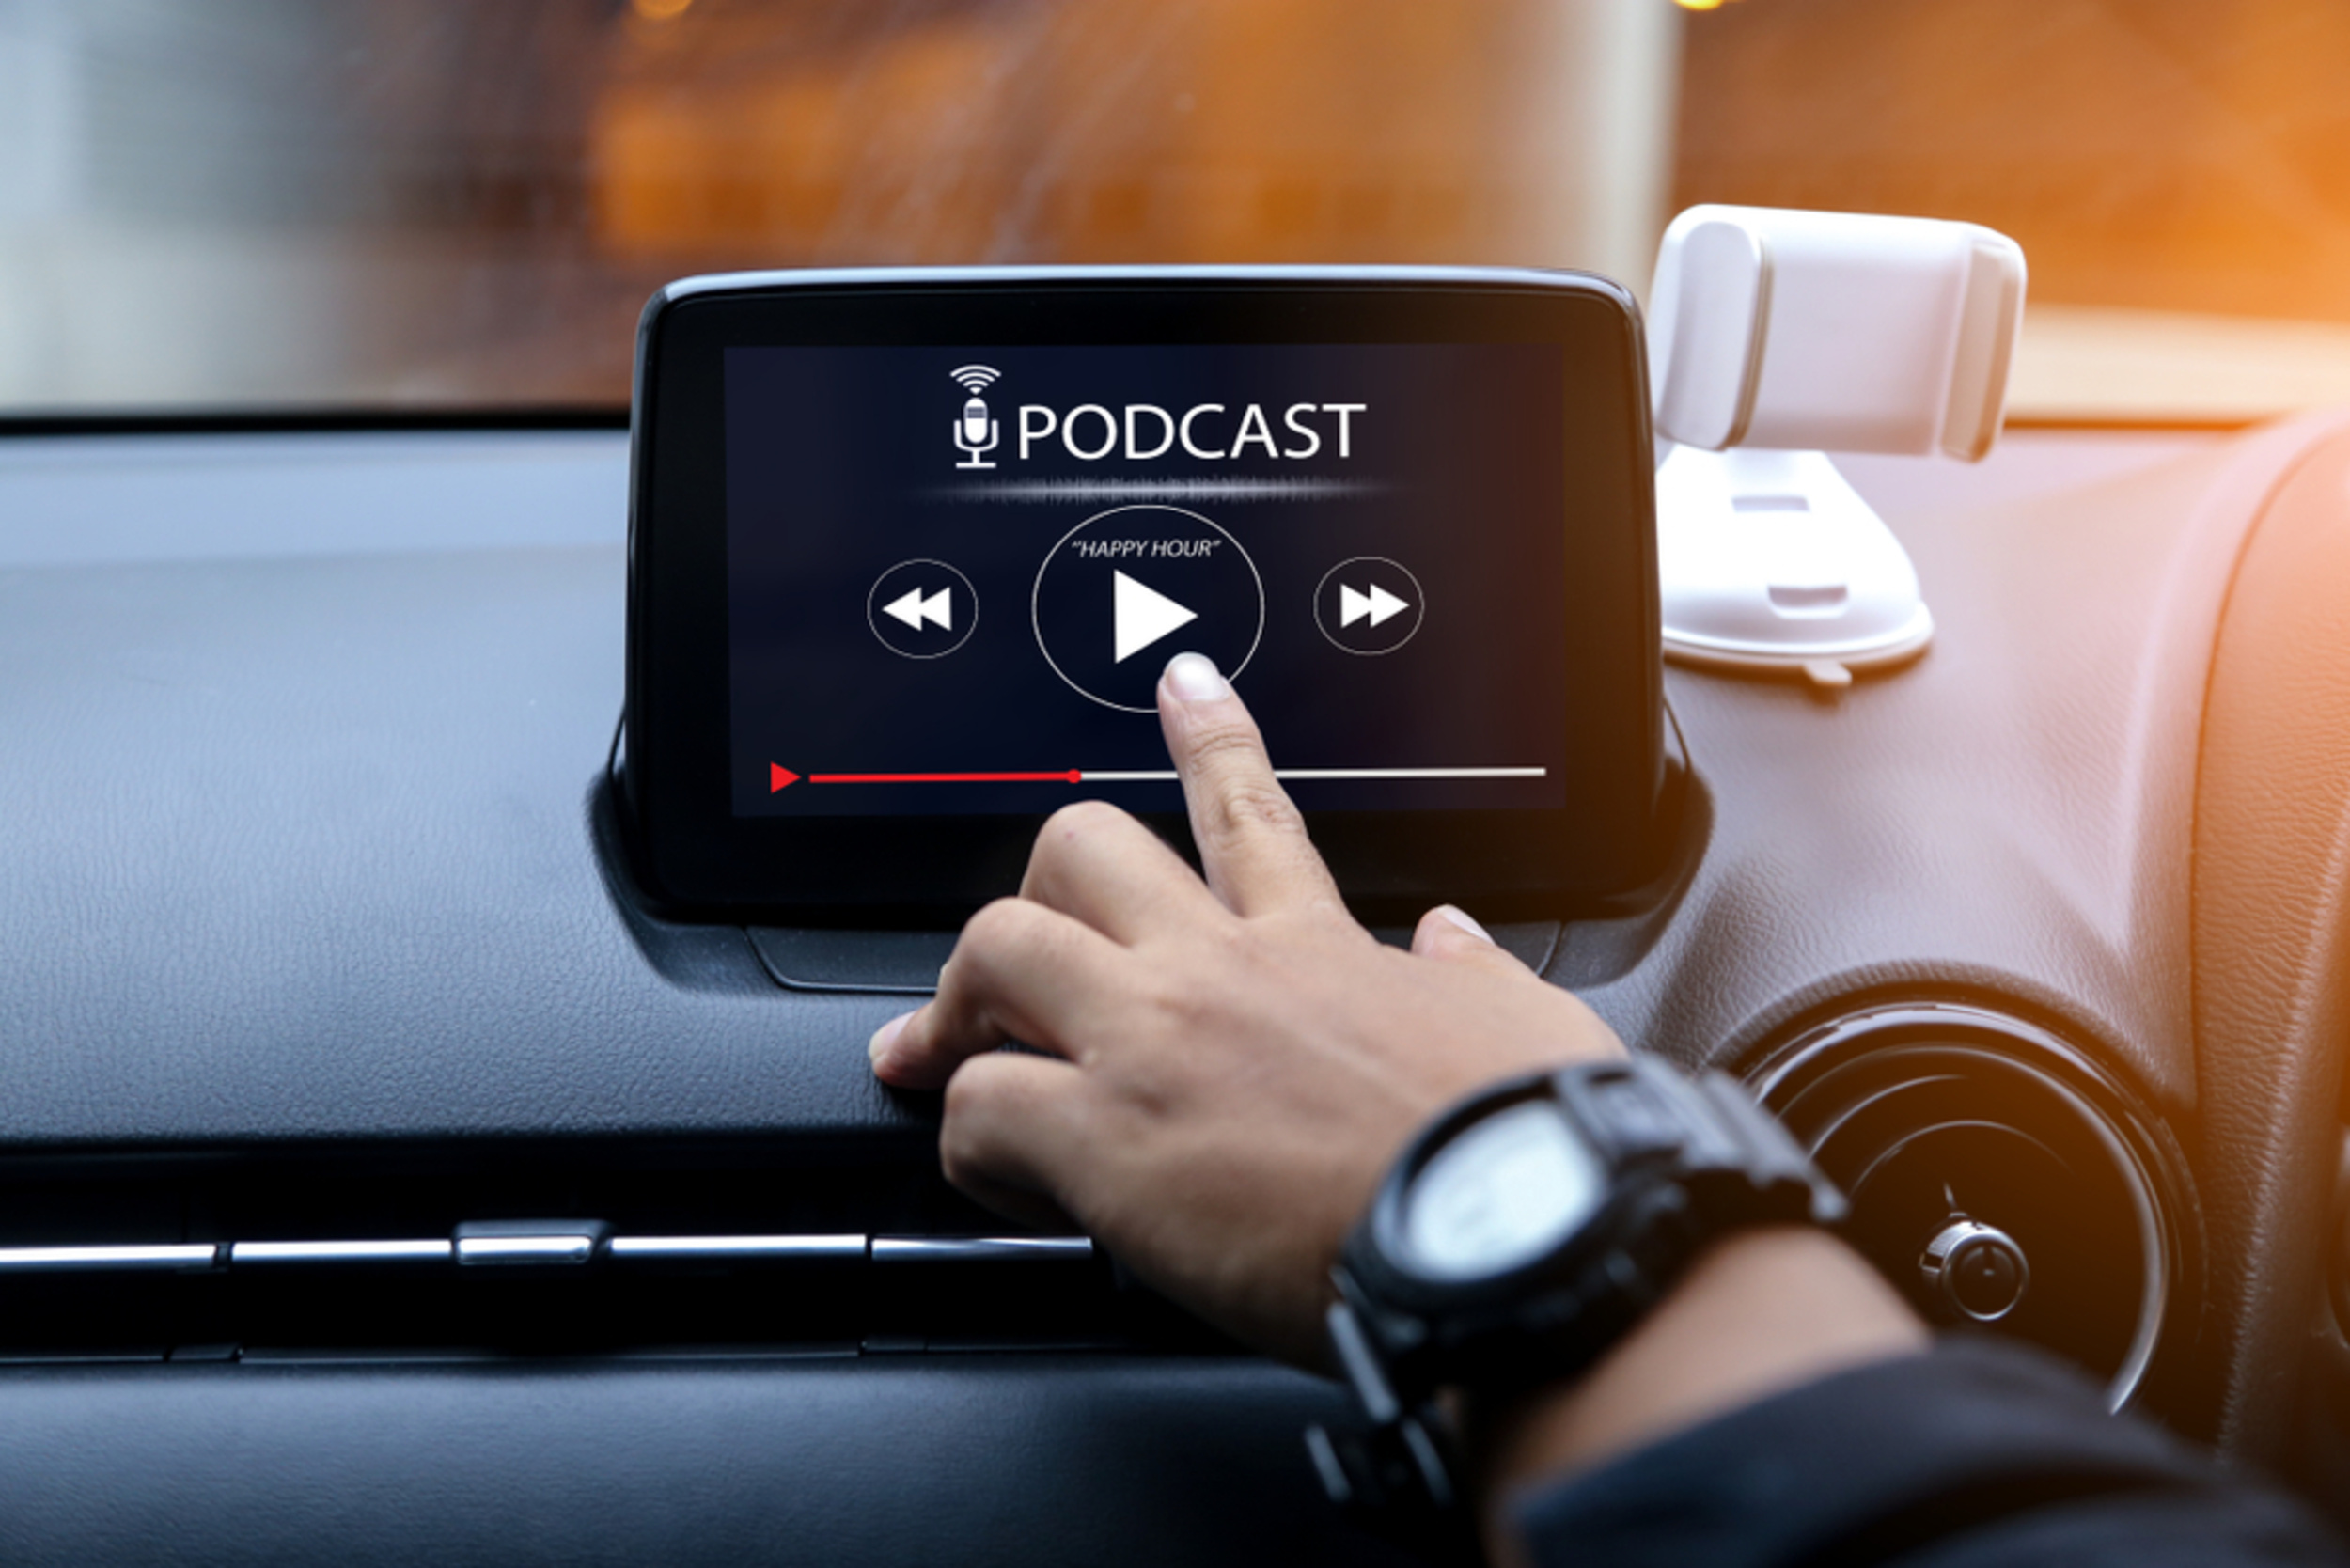 <p>If you're tired of listening to music, switch to something more narrative. Download a serial podcast or audiobook, and spend your drive absorbing new knowledge instead of just watching the scenery pass by.  </p><p>You may also like: <a href='https://www.yardbarker.com/lifestyle/articles/our_20_favorite_road_trip_snacks/s1__35553395'>Our 20 favorite road trip snacks</a></p>